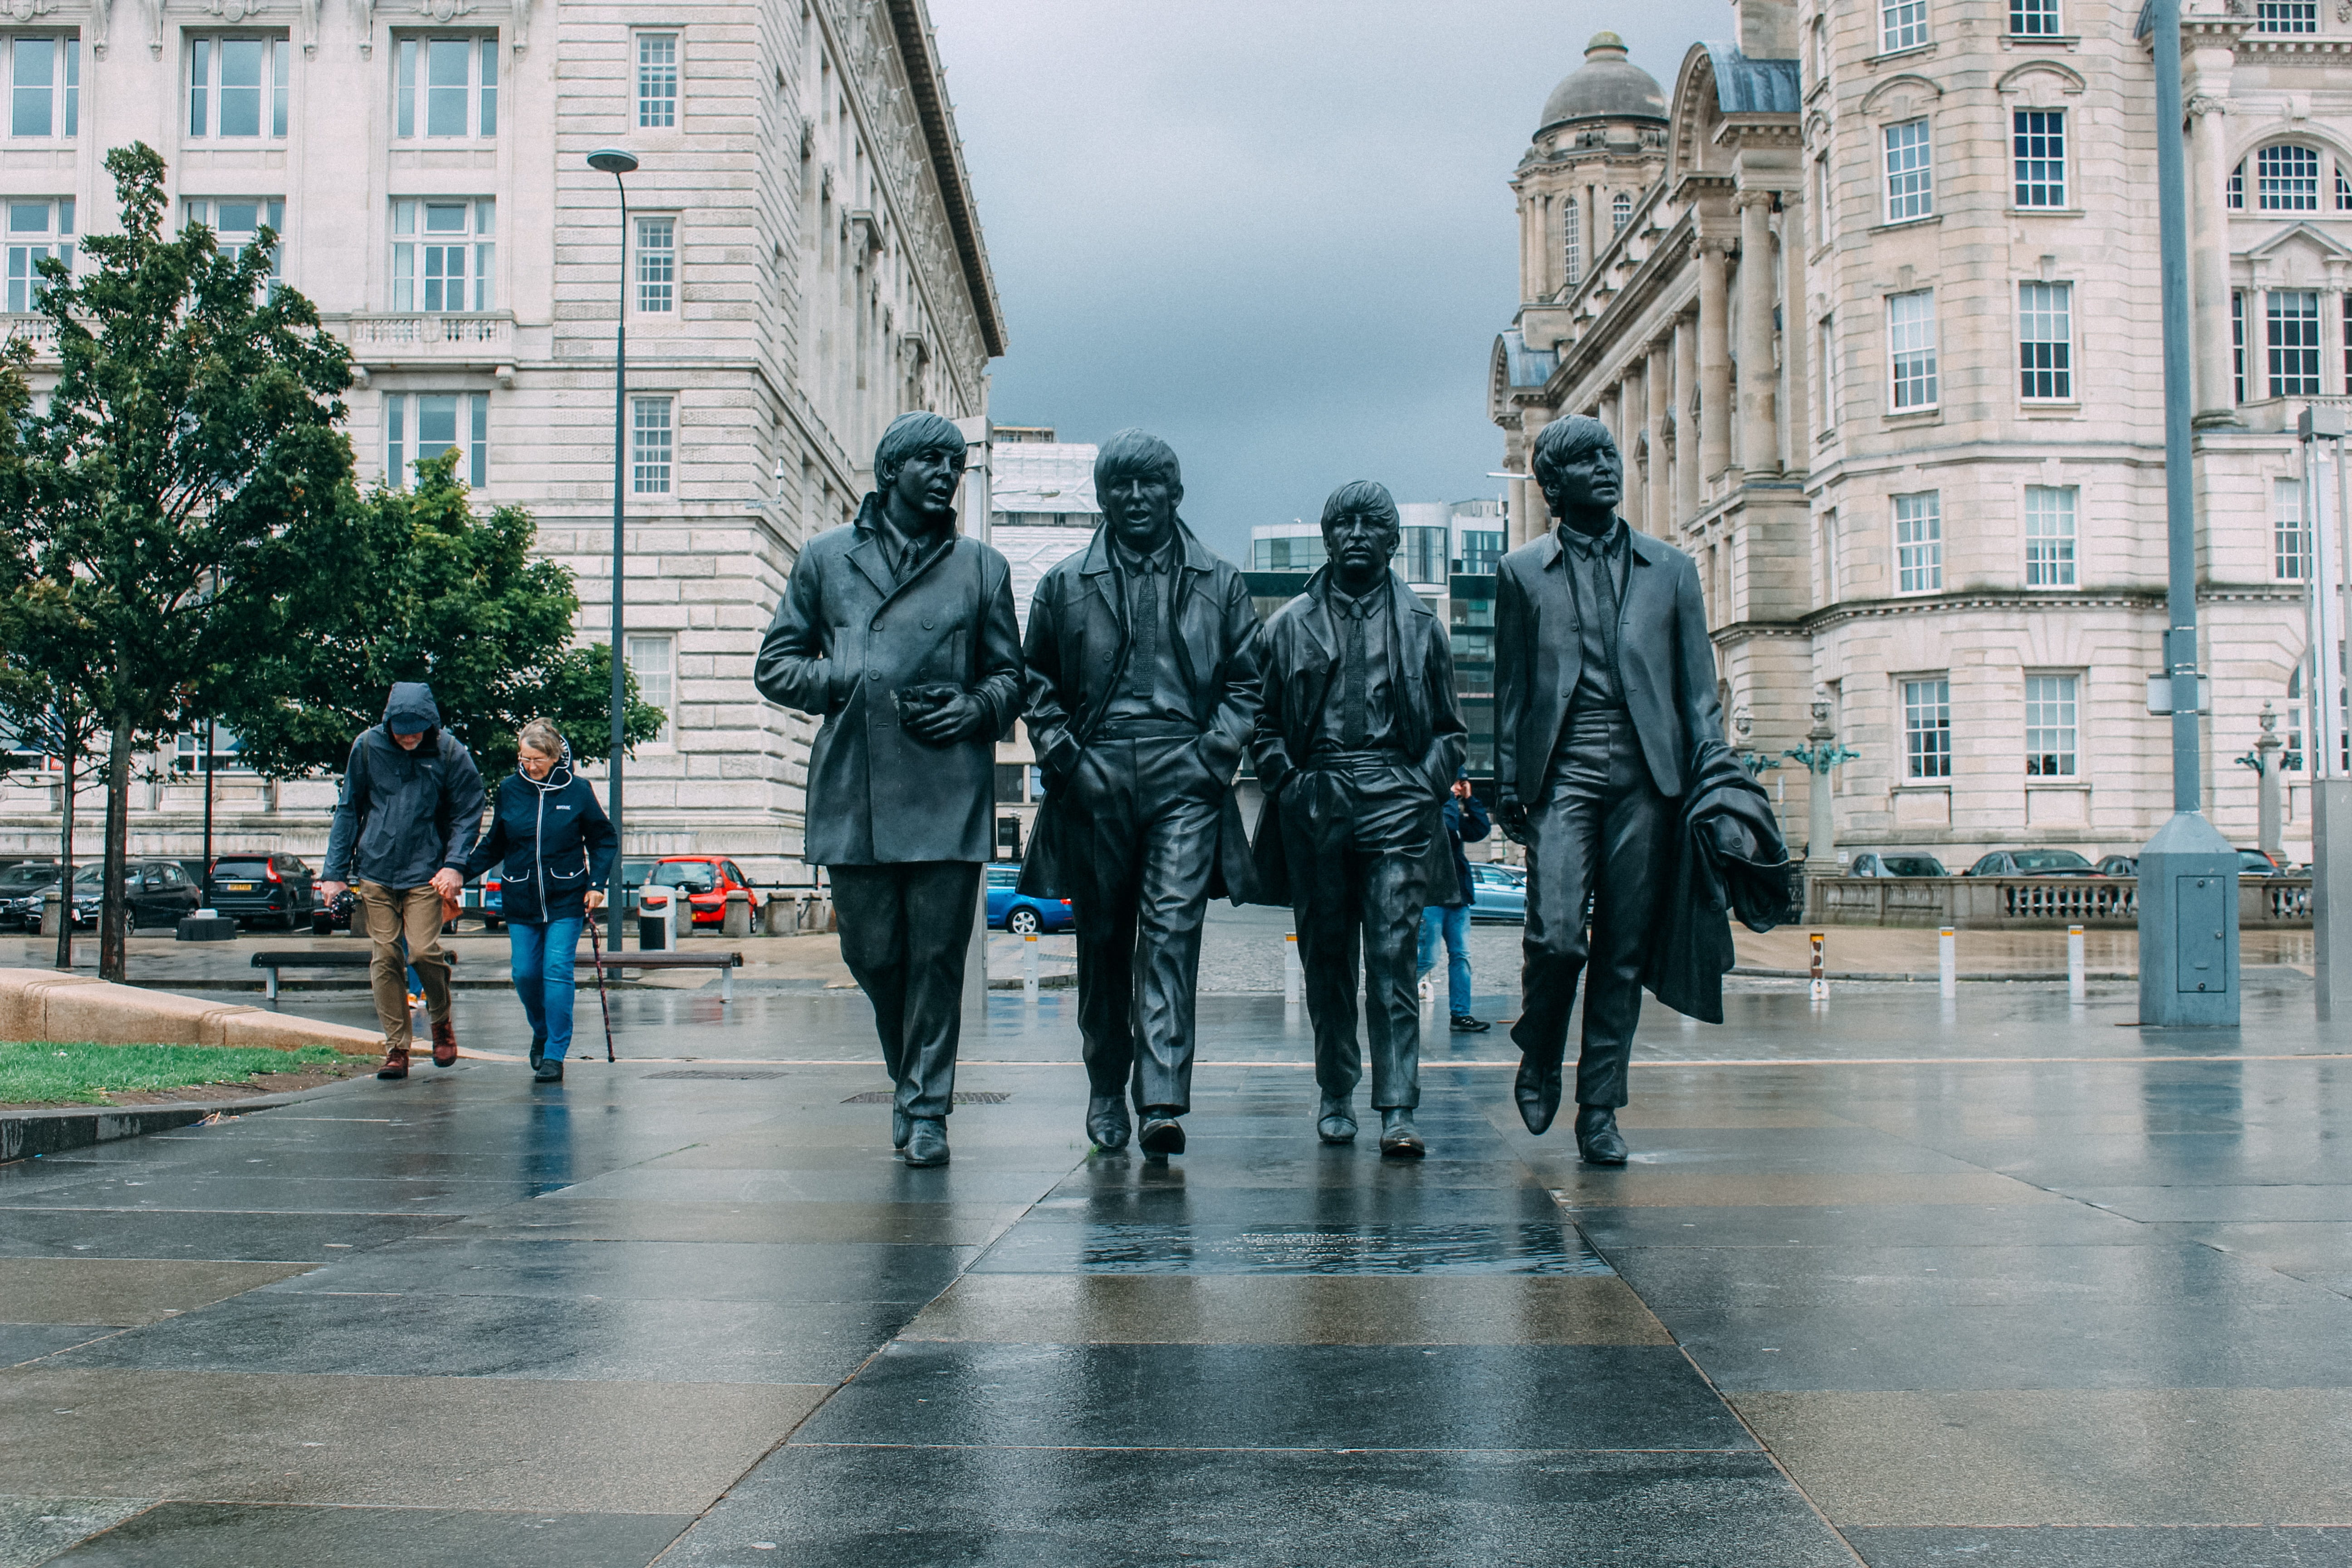 beatle, liverpool, raining, the beatles, music, statue, the story of the beatles